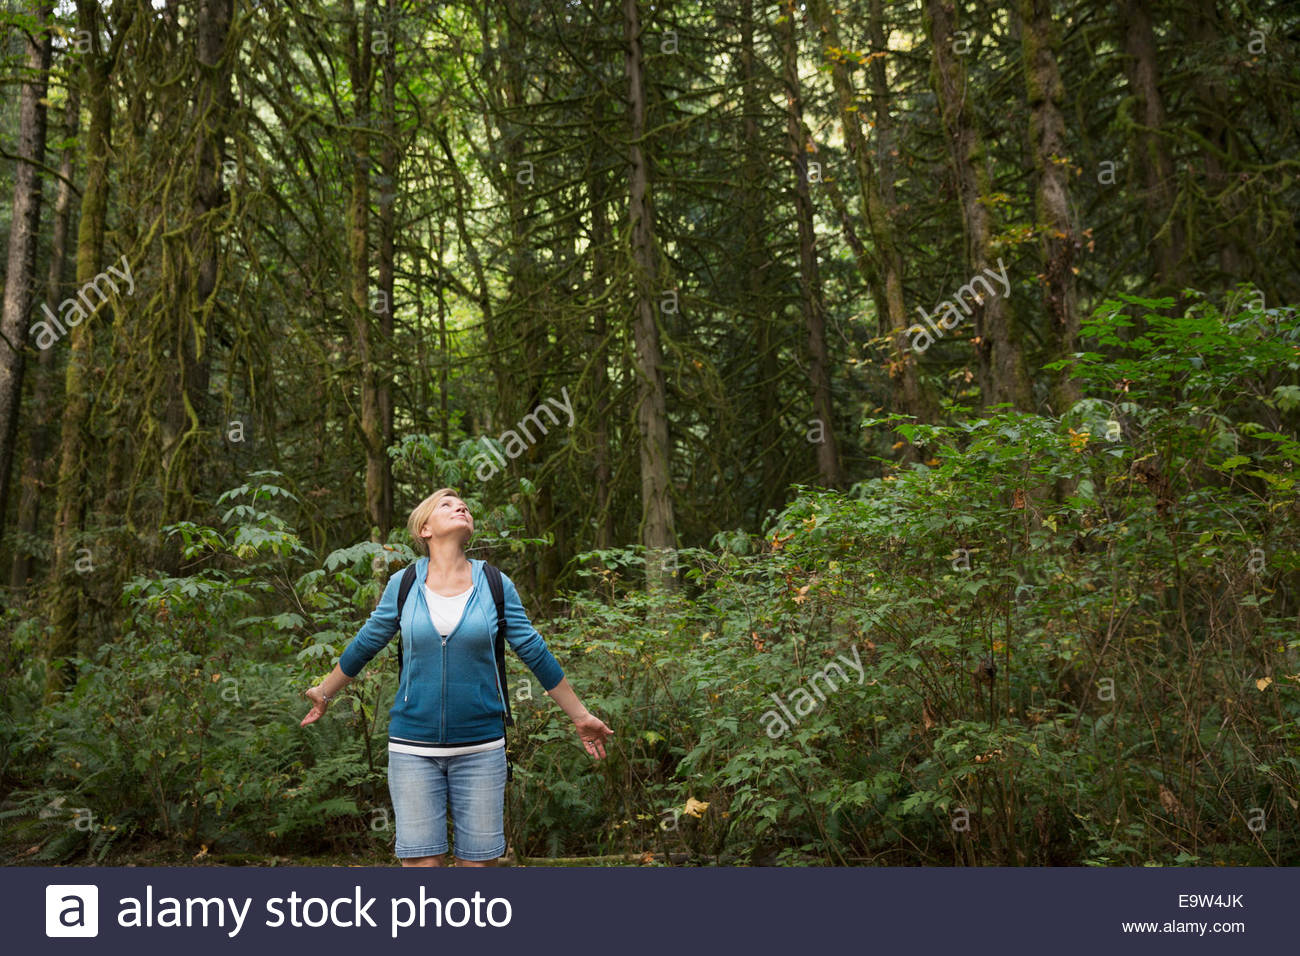 Woman with arms outstretched in woods Banque D'Images